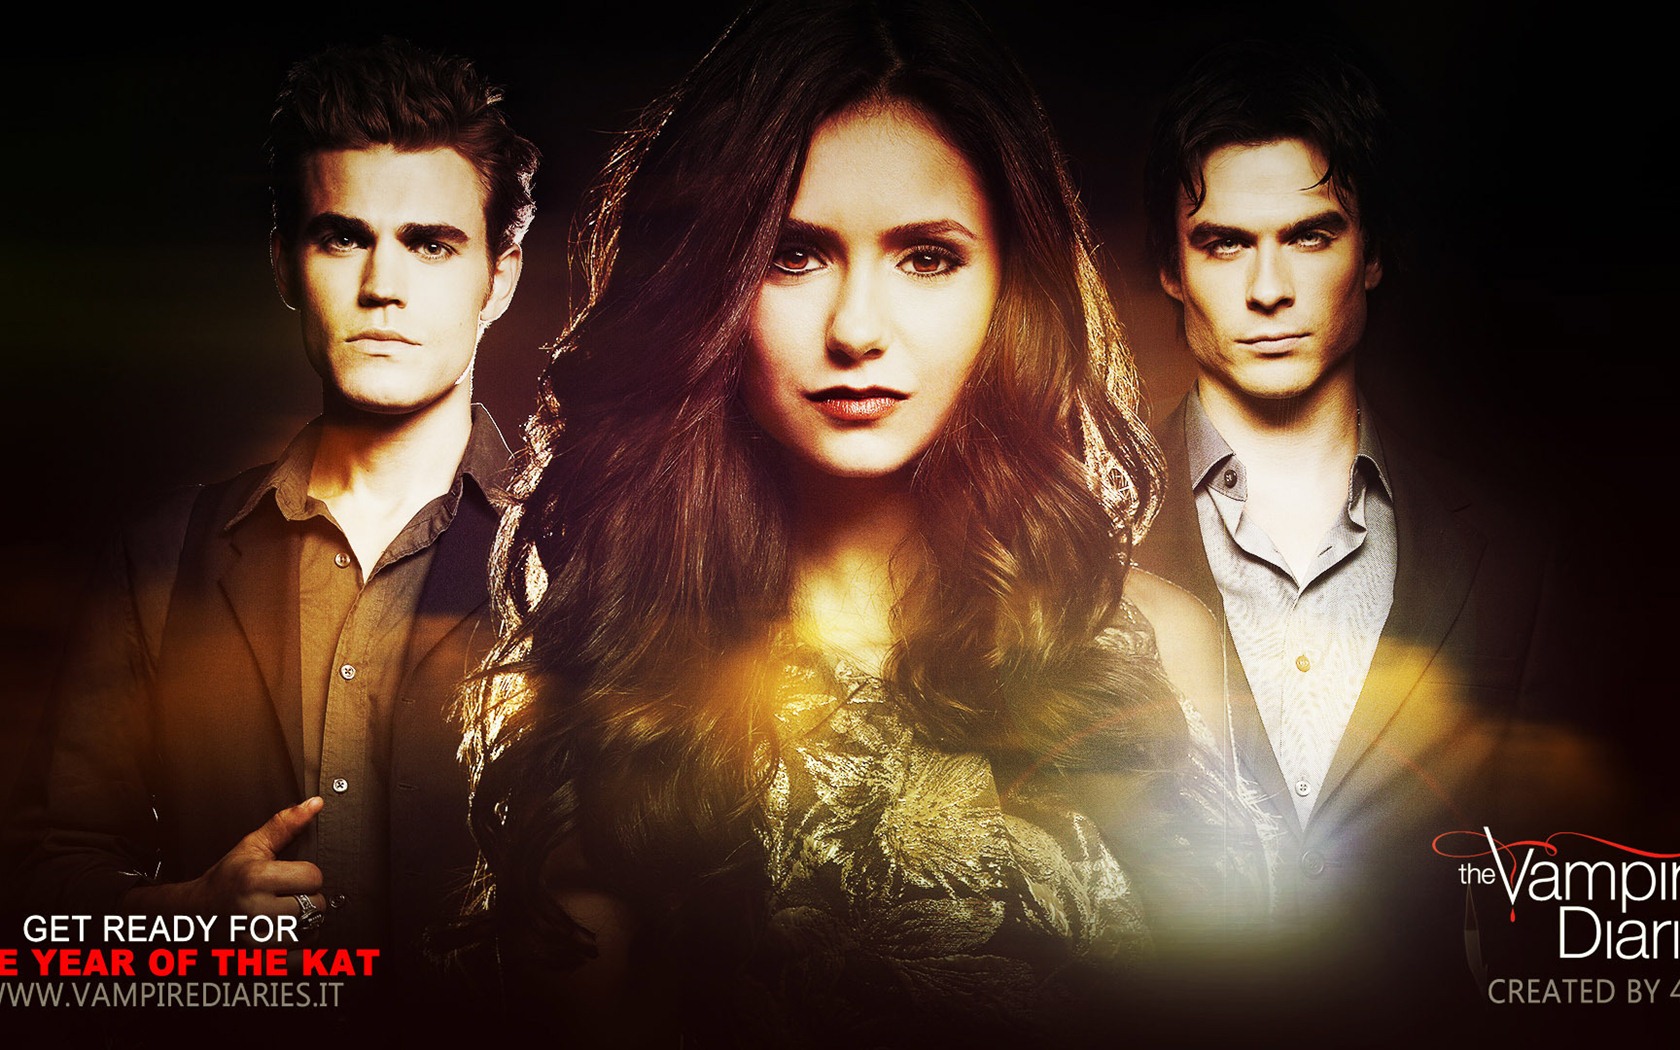 The Vampire Diaries HD Wallpapers #17 - 1680x1050